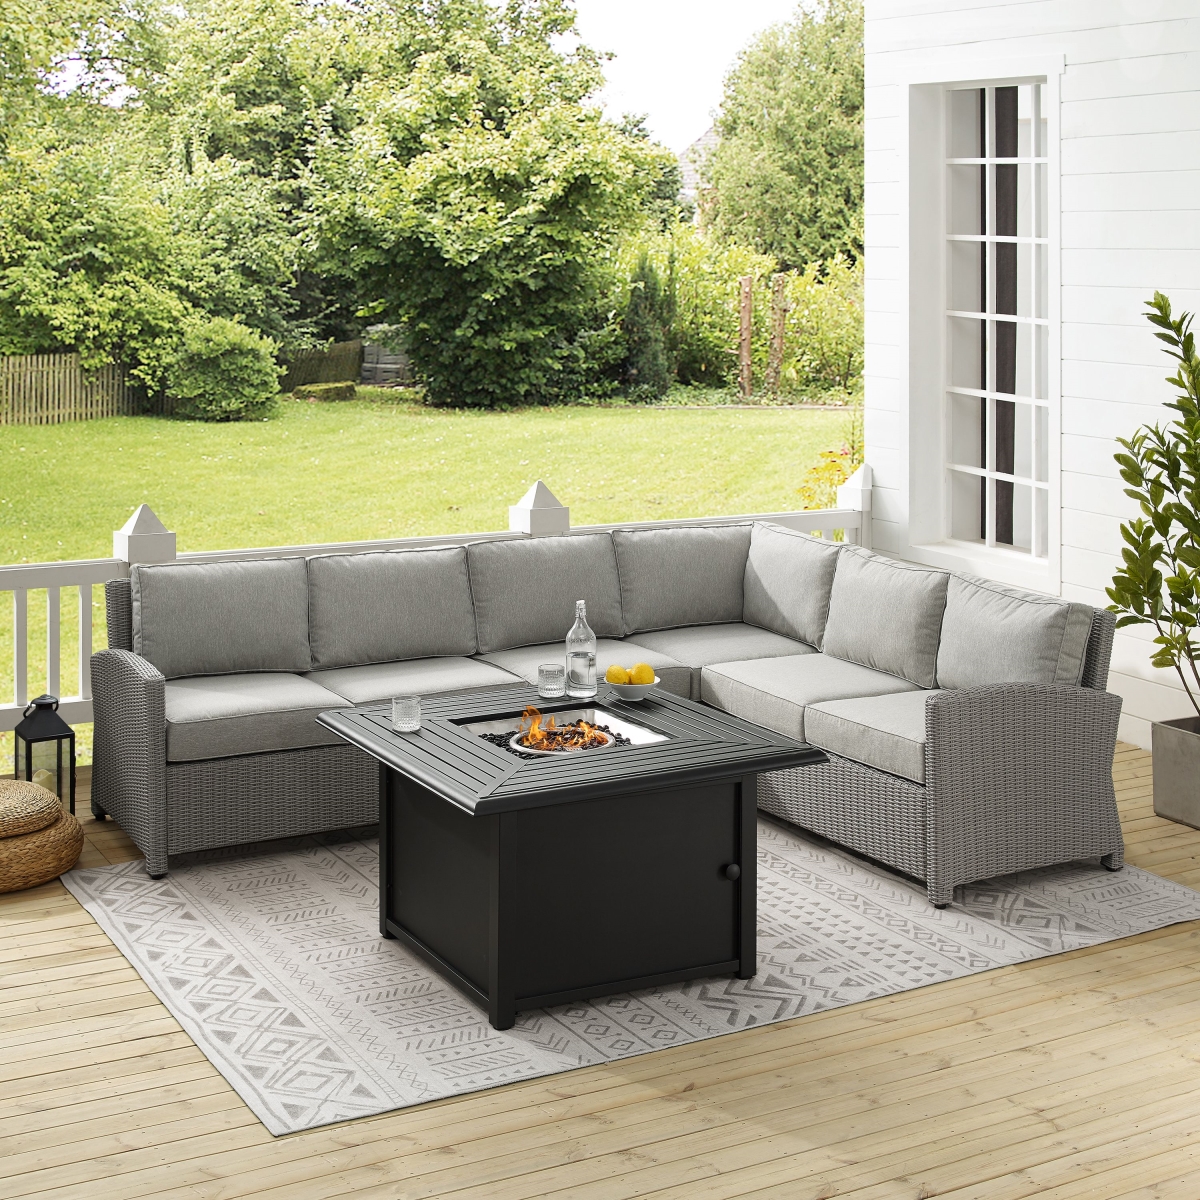 Picture of Crosley Furniture KO70167GY-GY Wicker Sectional Set with Fire Table&#44; Gray - Right Corner Loveseat&#44; Left Corner Loveseat - Center Chair - Corner Chair & Dante Fire Table - 5 Piece